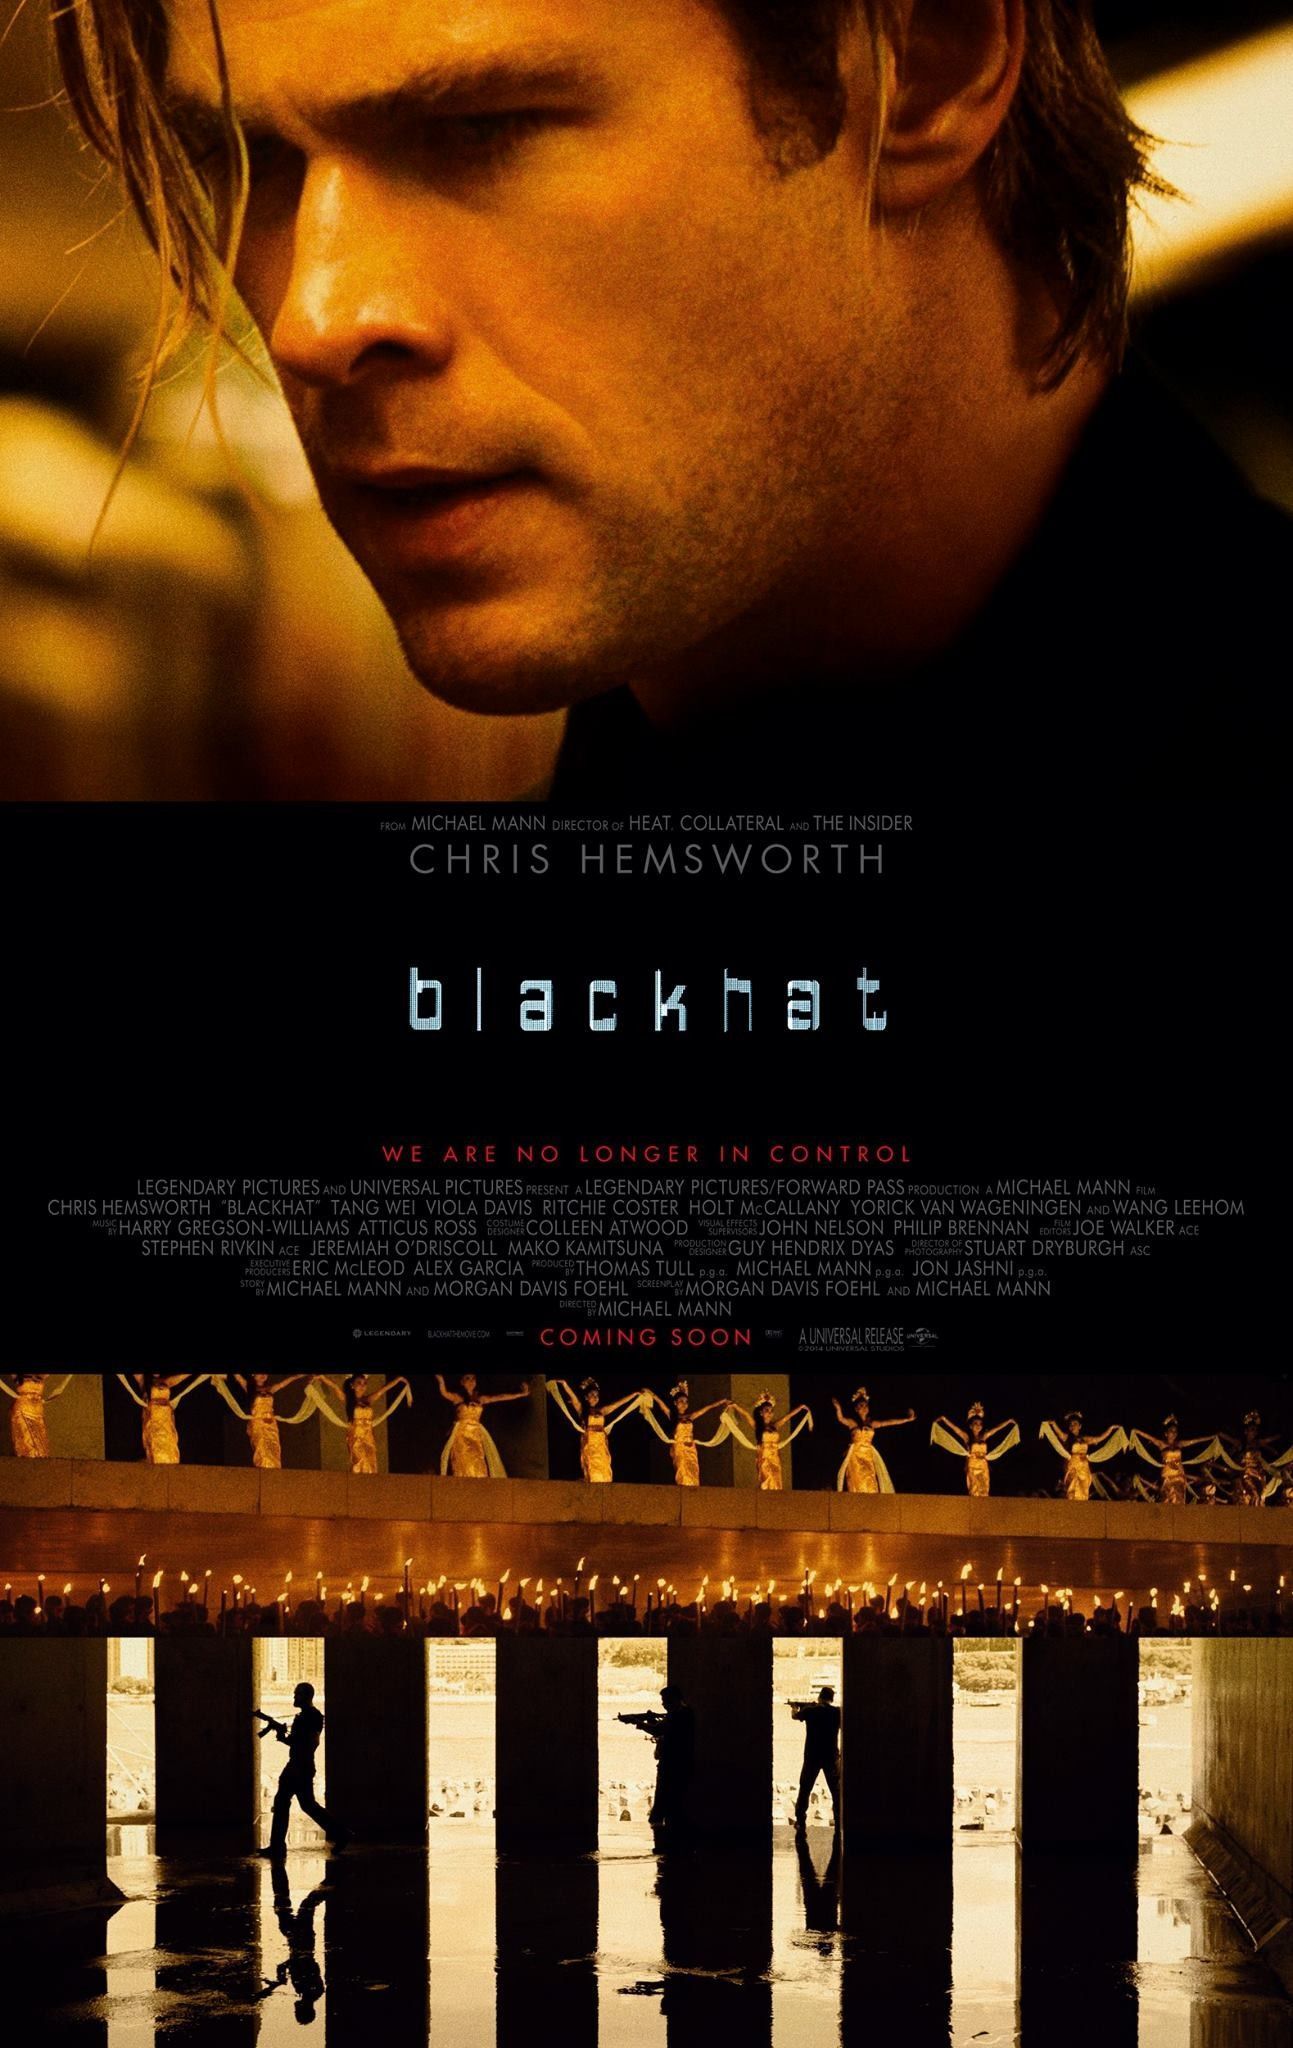 Michael Mann’s Underrated ‘Blackhat’ Was Ahead of Its Time